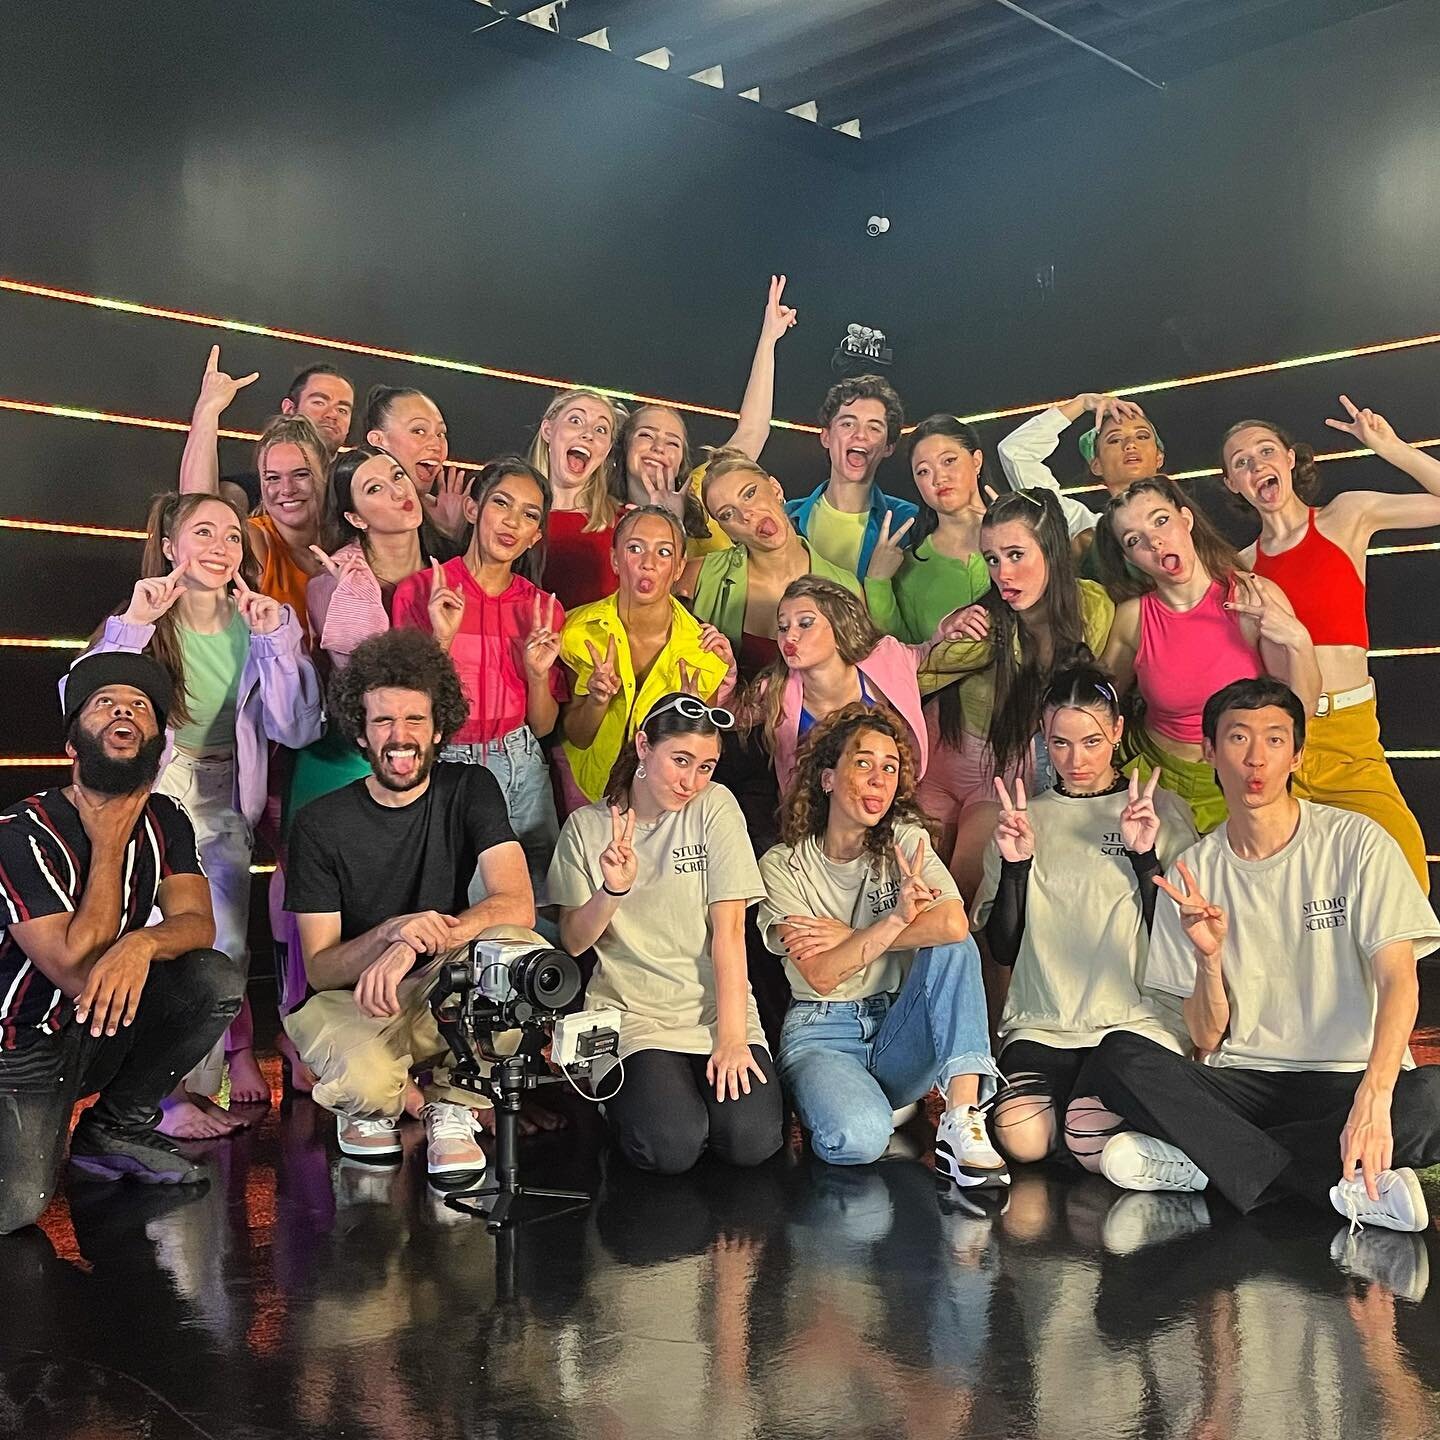 HUGE THANK YOU to this amazing crew and this beautiful cast of my first @studio_to_screen on camera workshop! Still at a loss for words, for now, just THANK YOU!! 🥹❤️✨
&bull;
THATS A WRAP ON DAY 3!! 
Director/choreographer @ginamenichino 
Director o